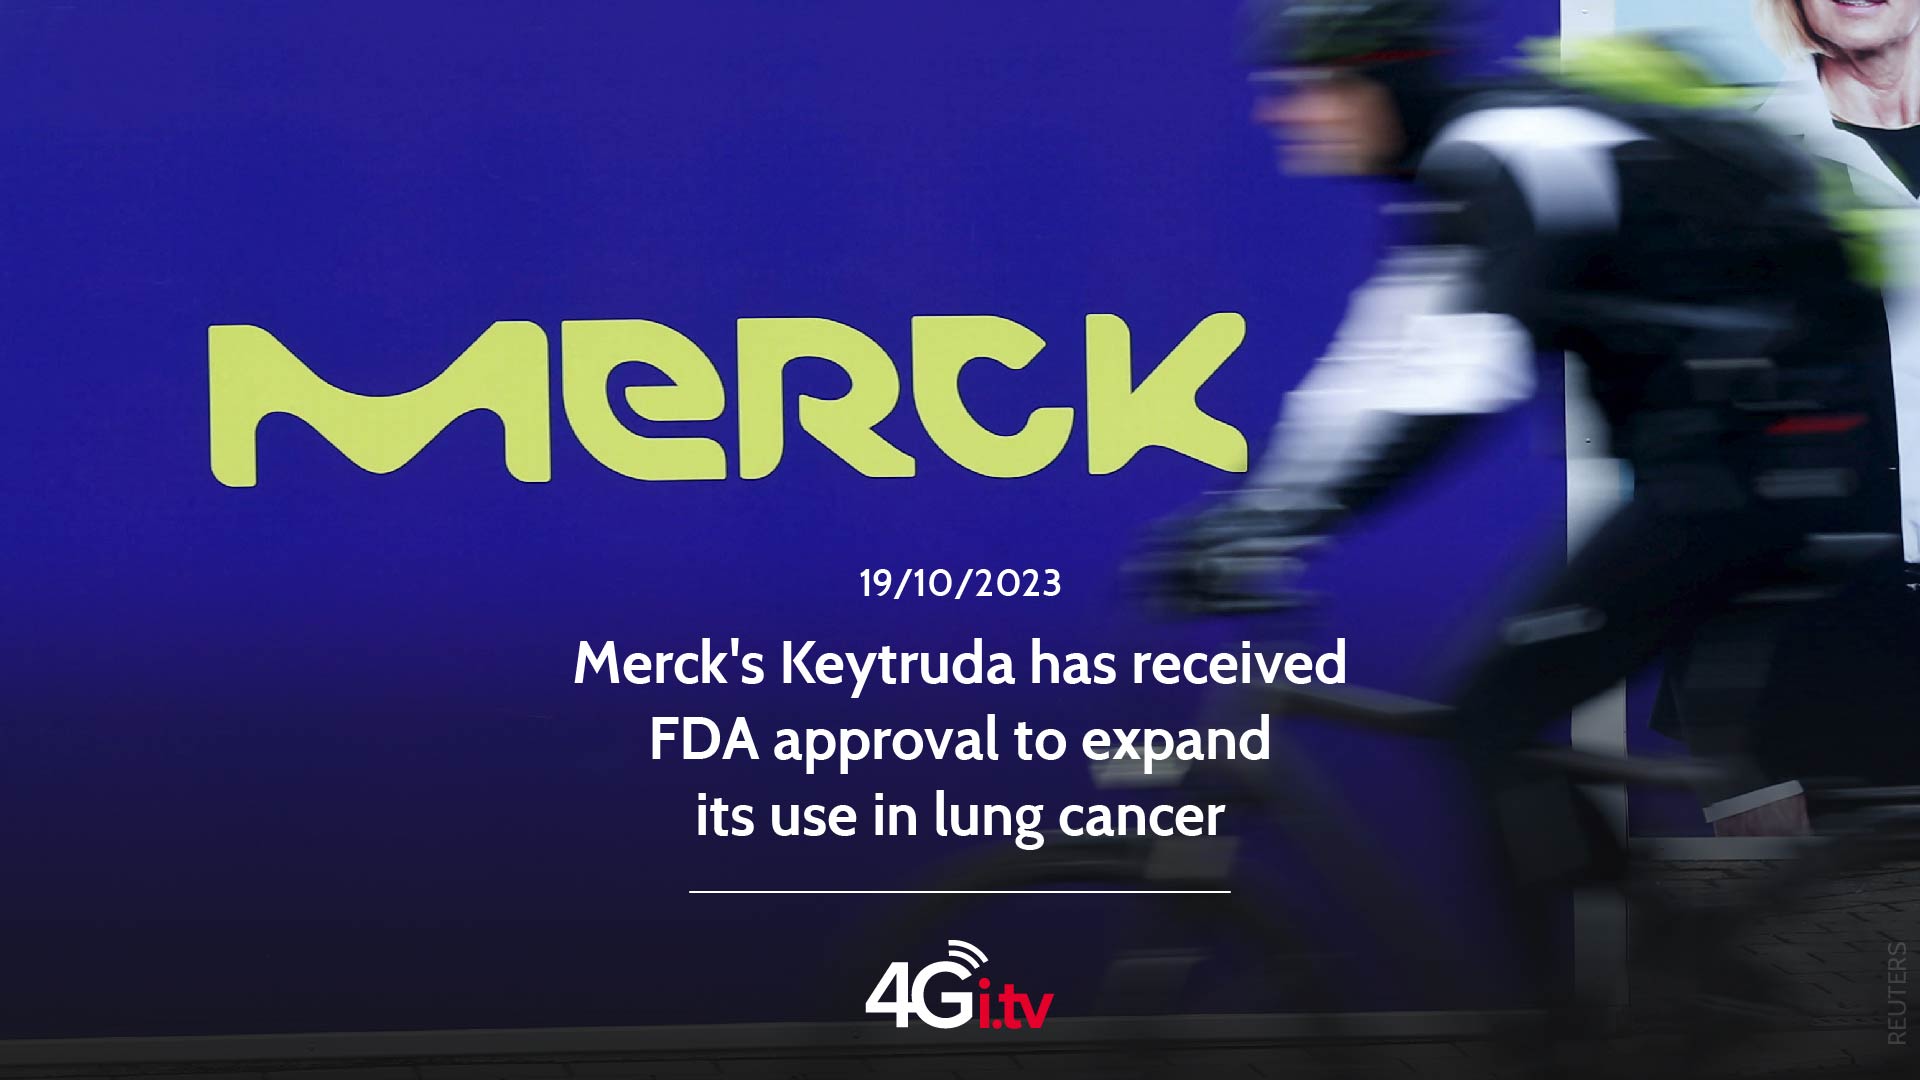 Подробнее о статье Merck’s Keytruda has received FDA approval to expand its use in lung cancer